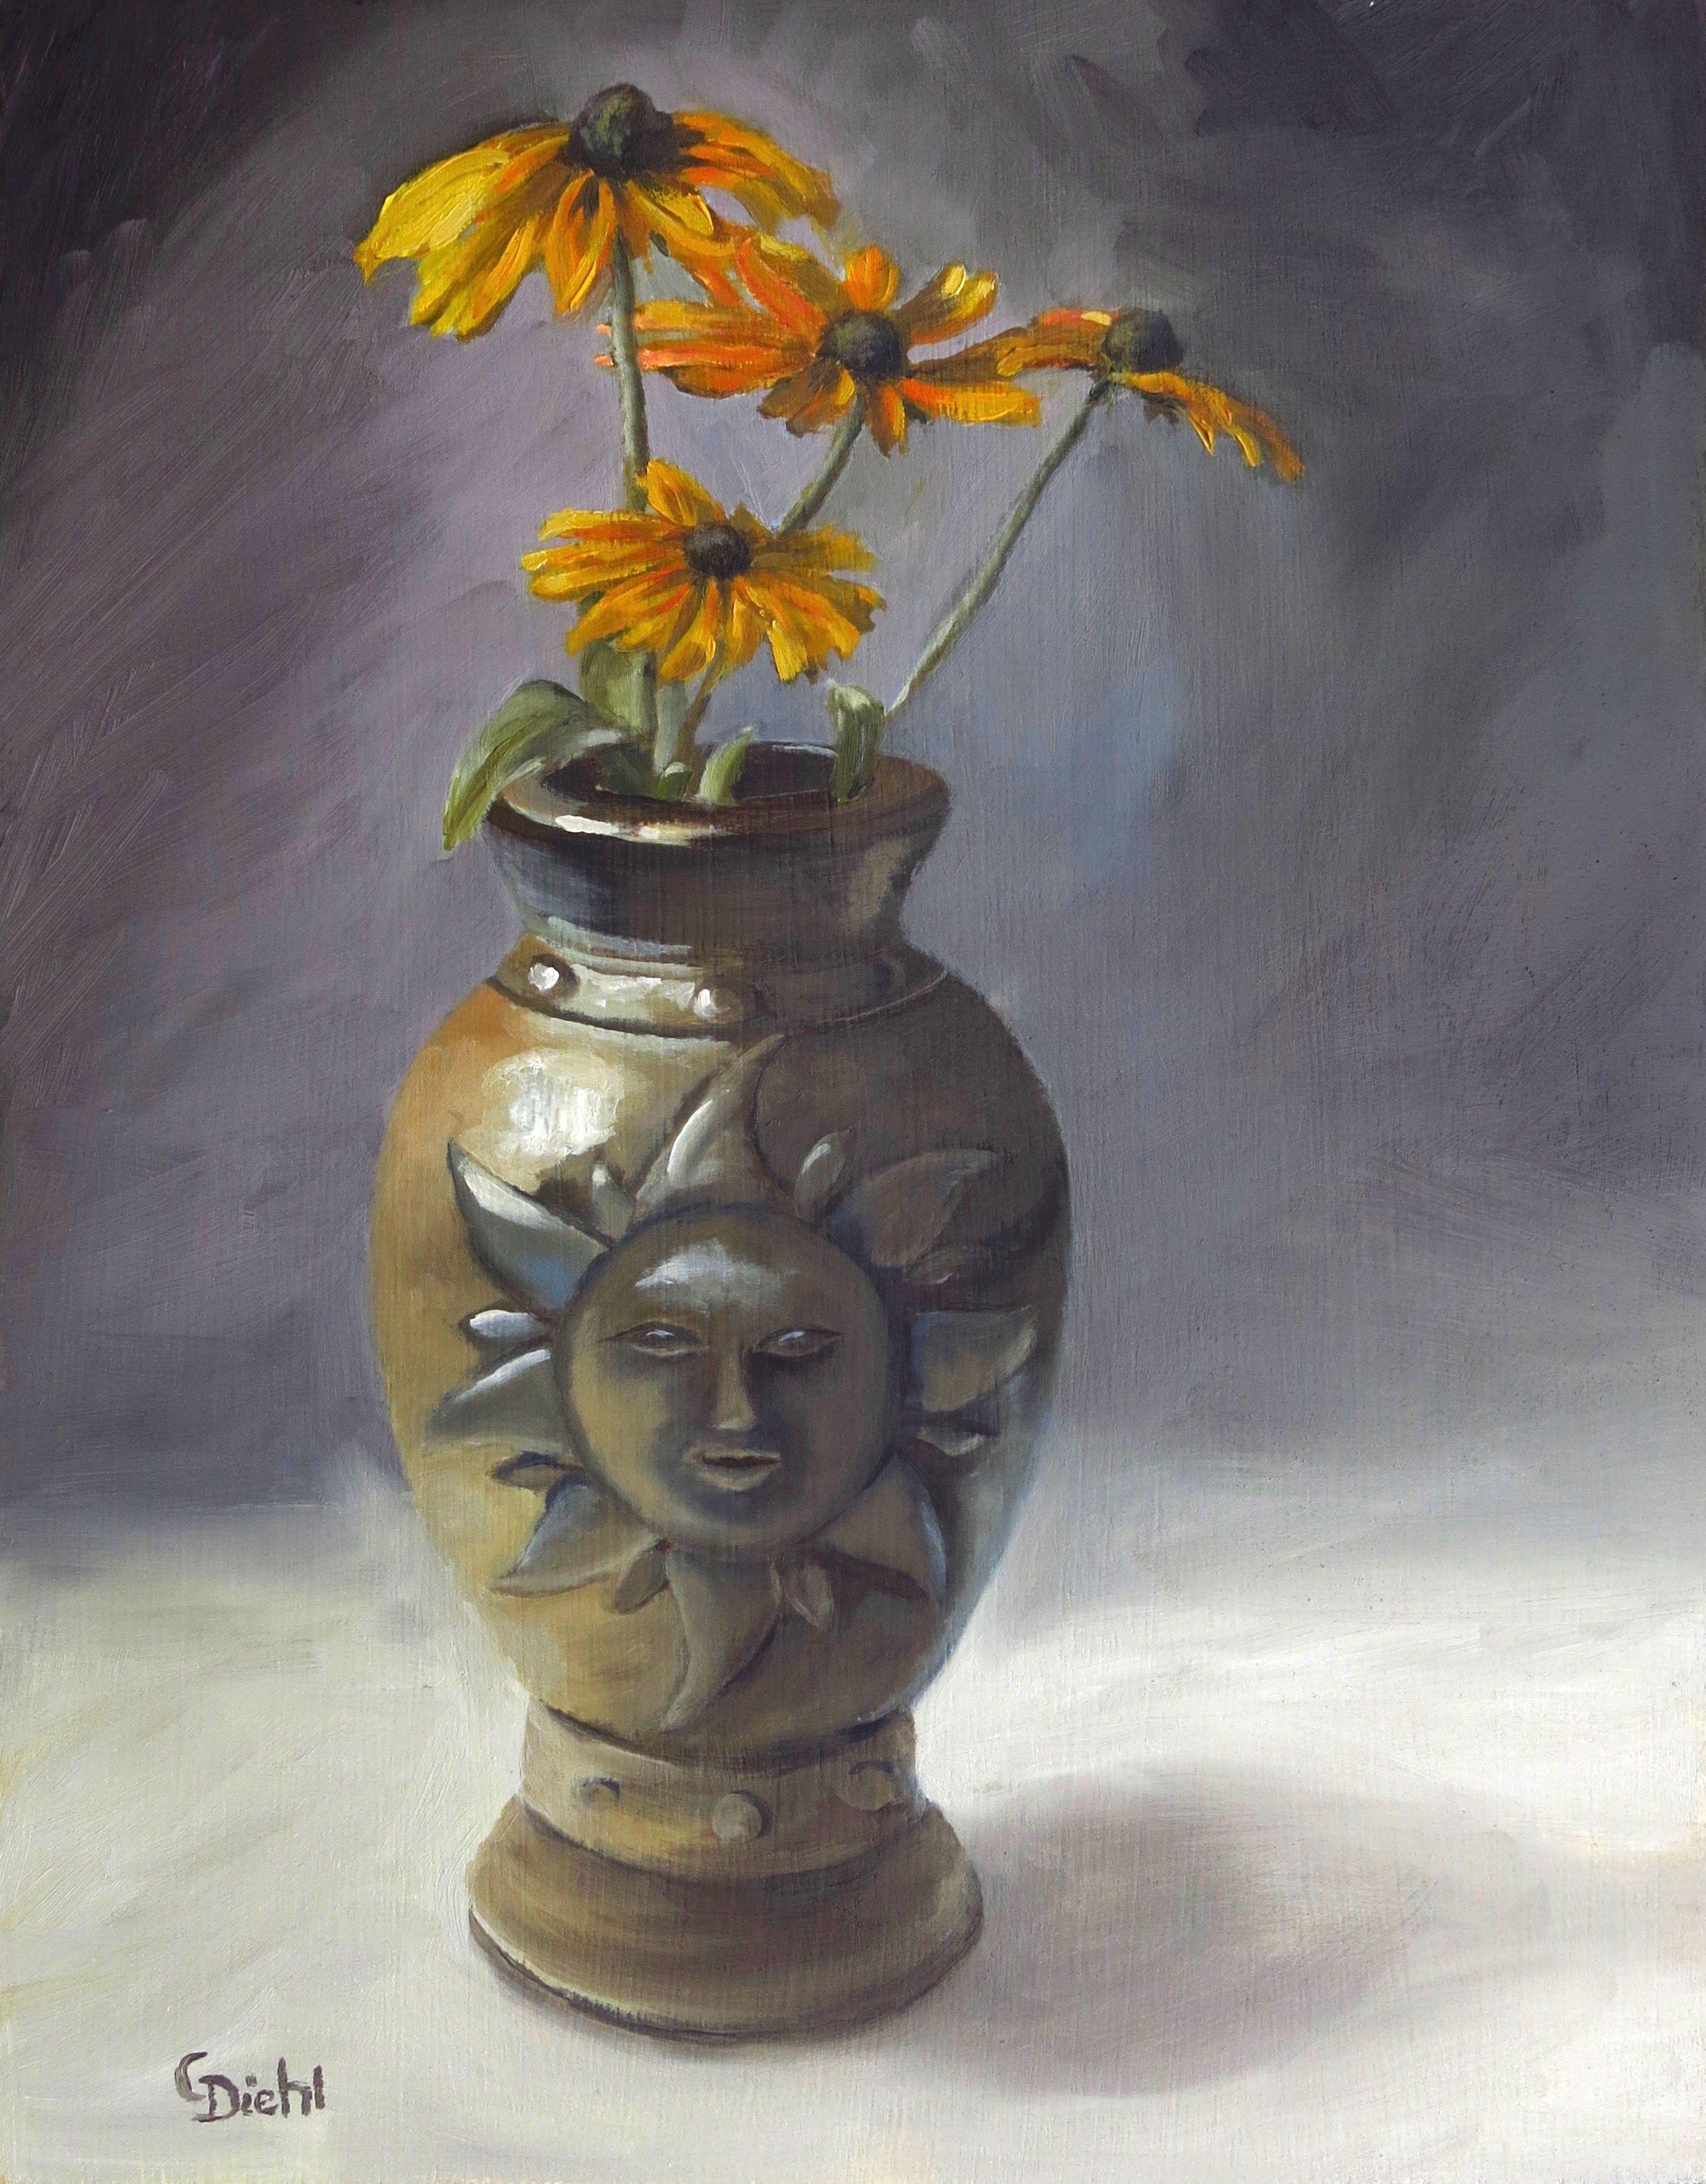 This is a floral, original, still life displaying yellow, garden daisies. They were placed in a vase with a celestial motif on it. I thought this was apropos since I wanted to unite the sunlit, yellow flowers with cheerfulness and also intriguing.